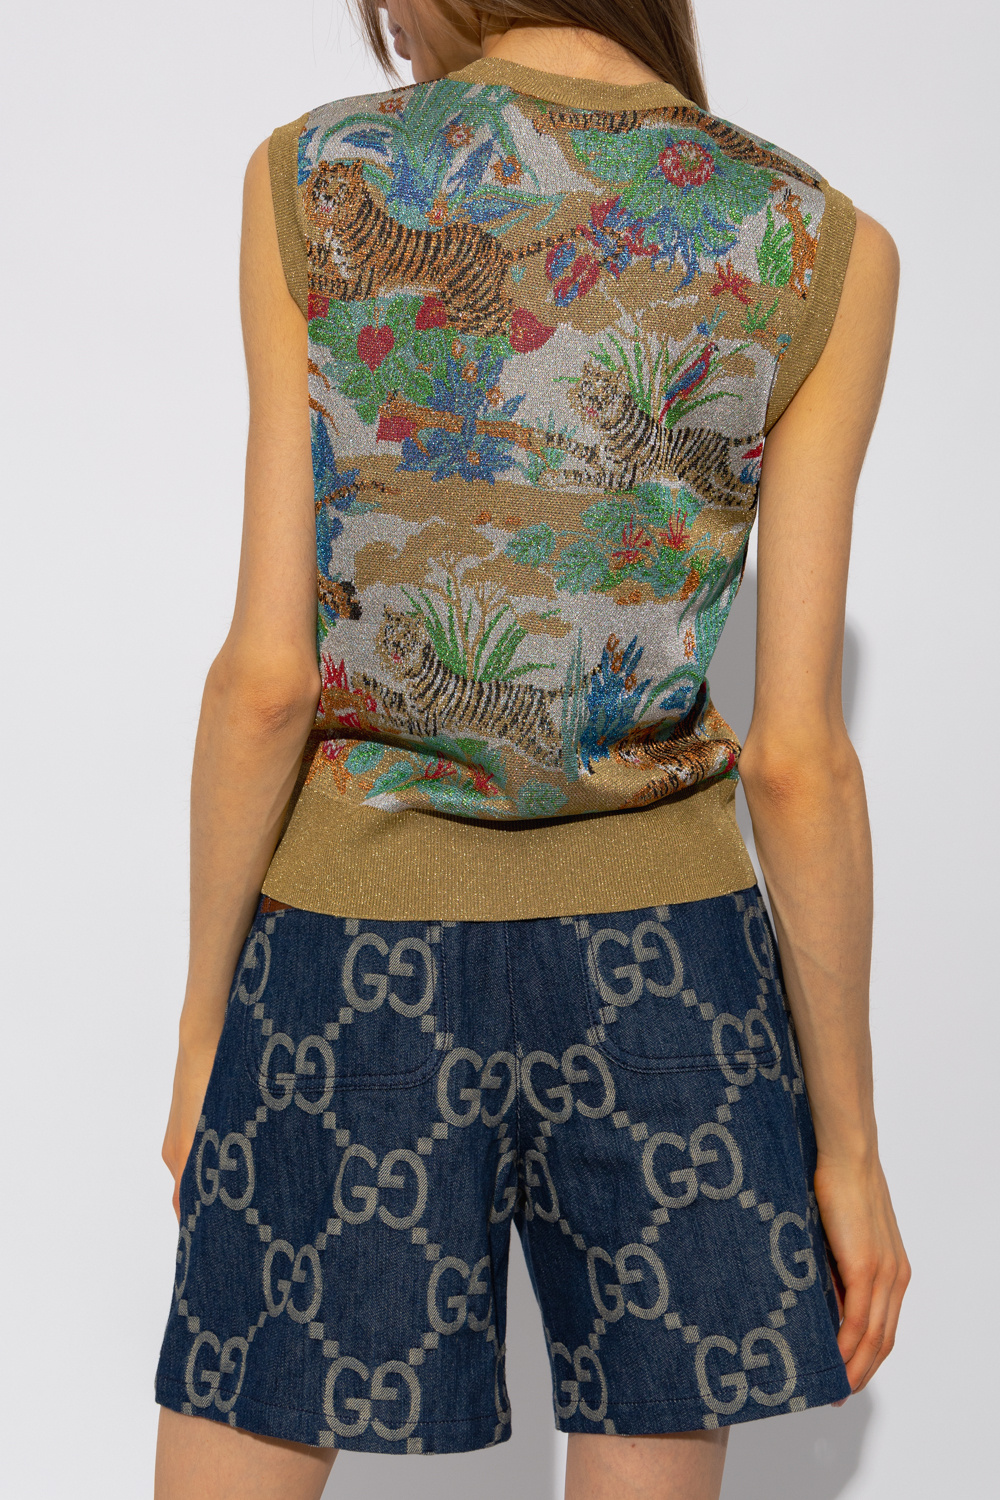 Gucci Jacquard vest from the ‘Gucci Tiger’ collection